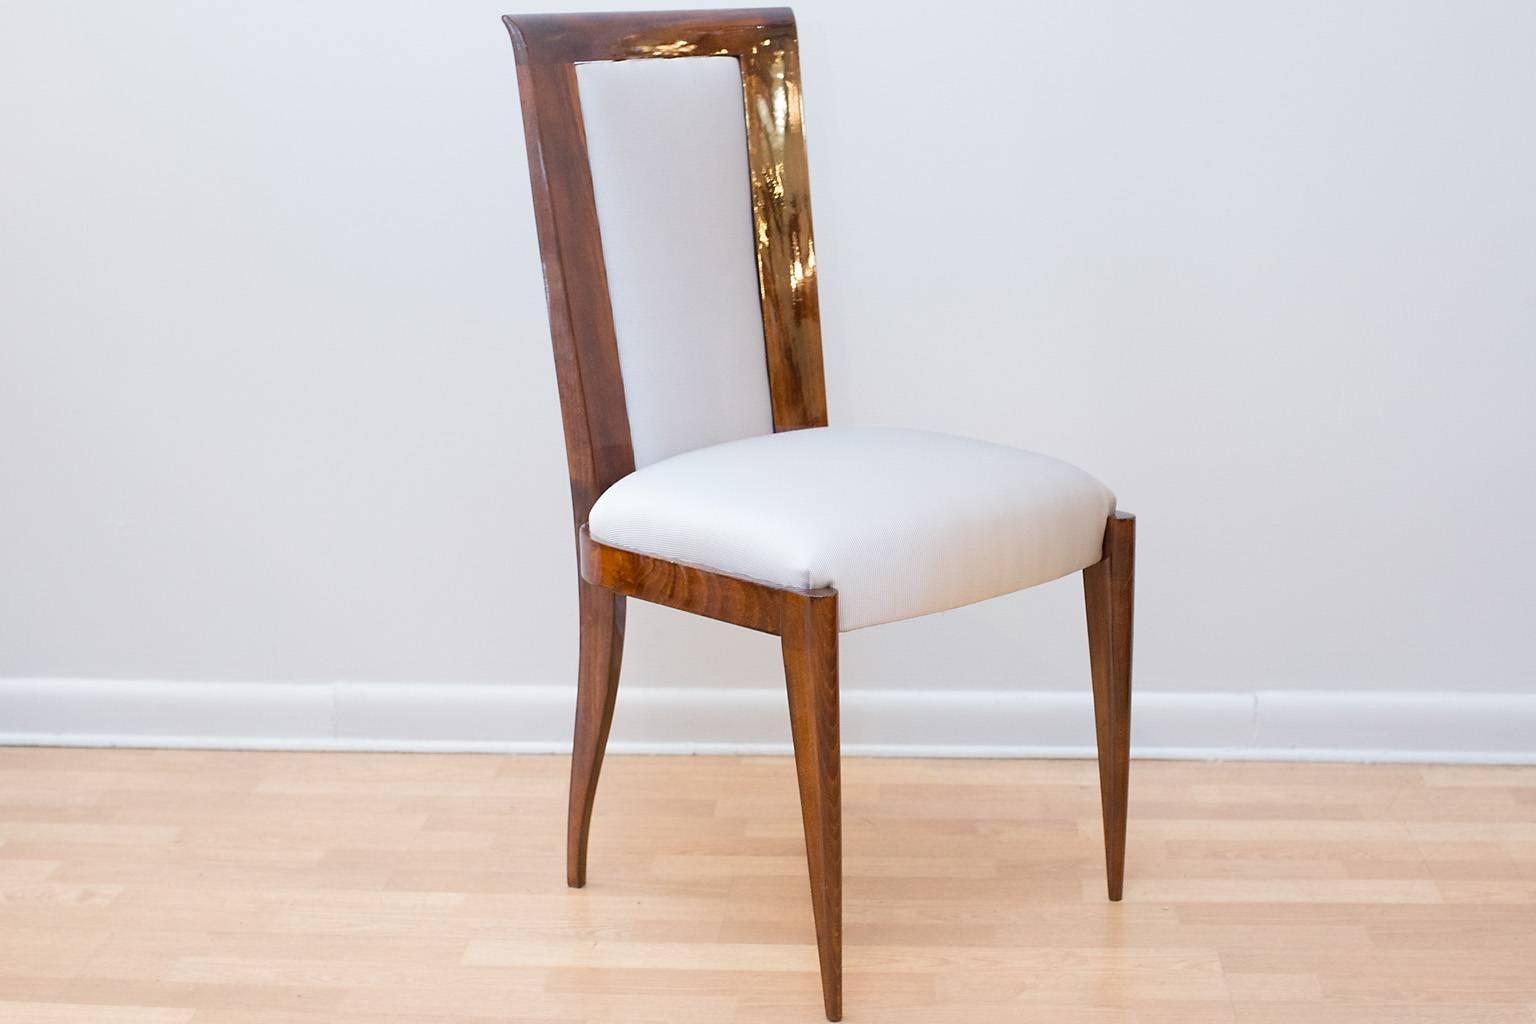 French Art Deco dining chairs with upholstered seat and backs.